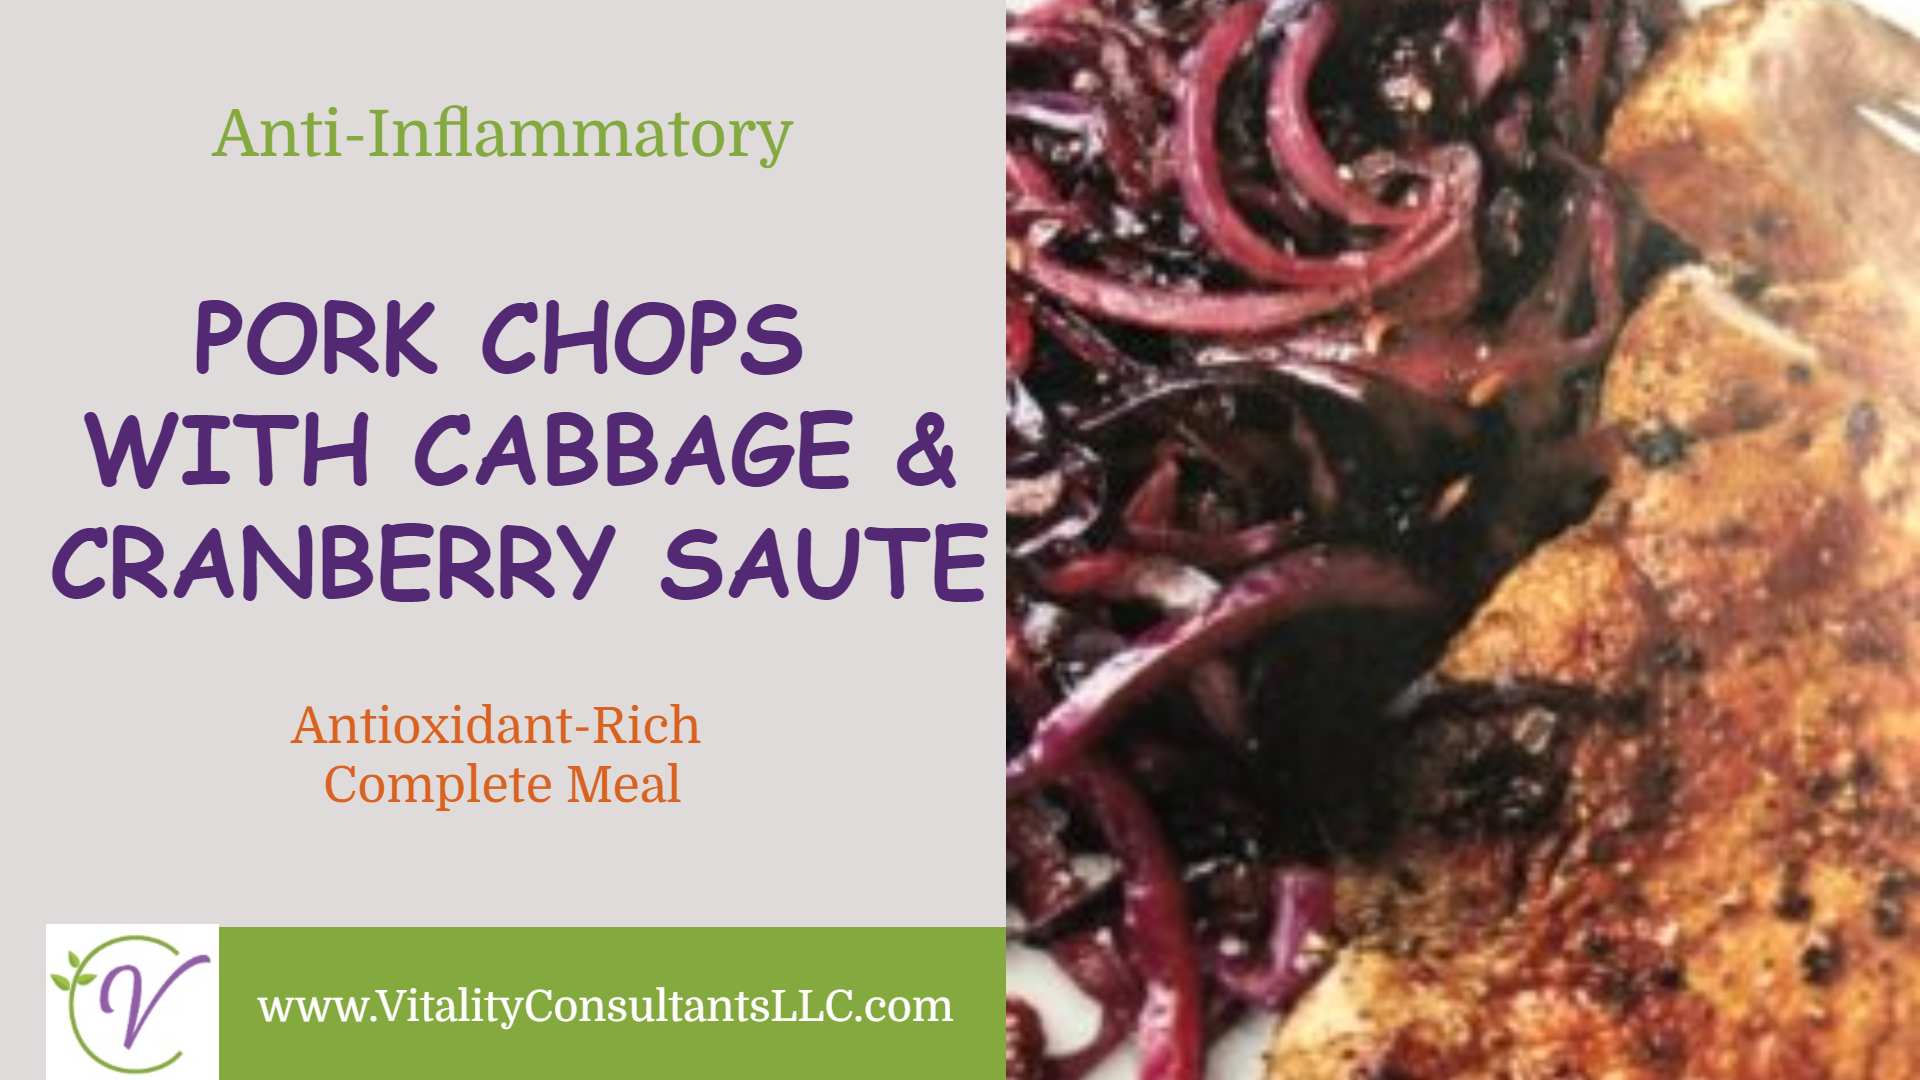 Pork Chops with Cabbage & Cranberry